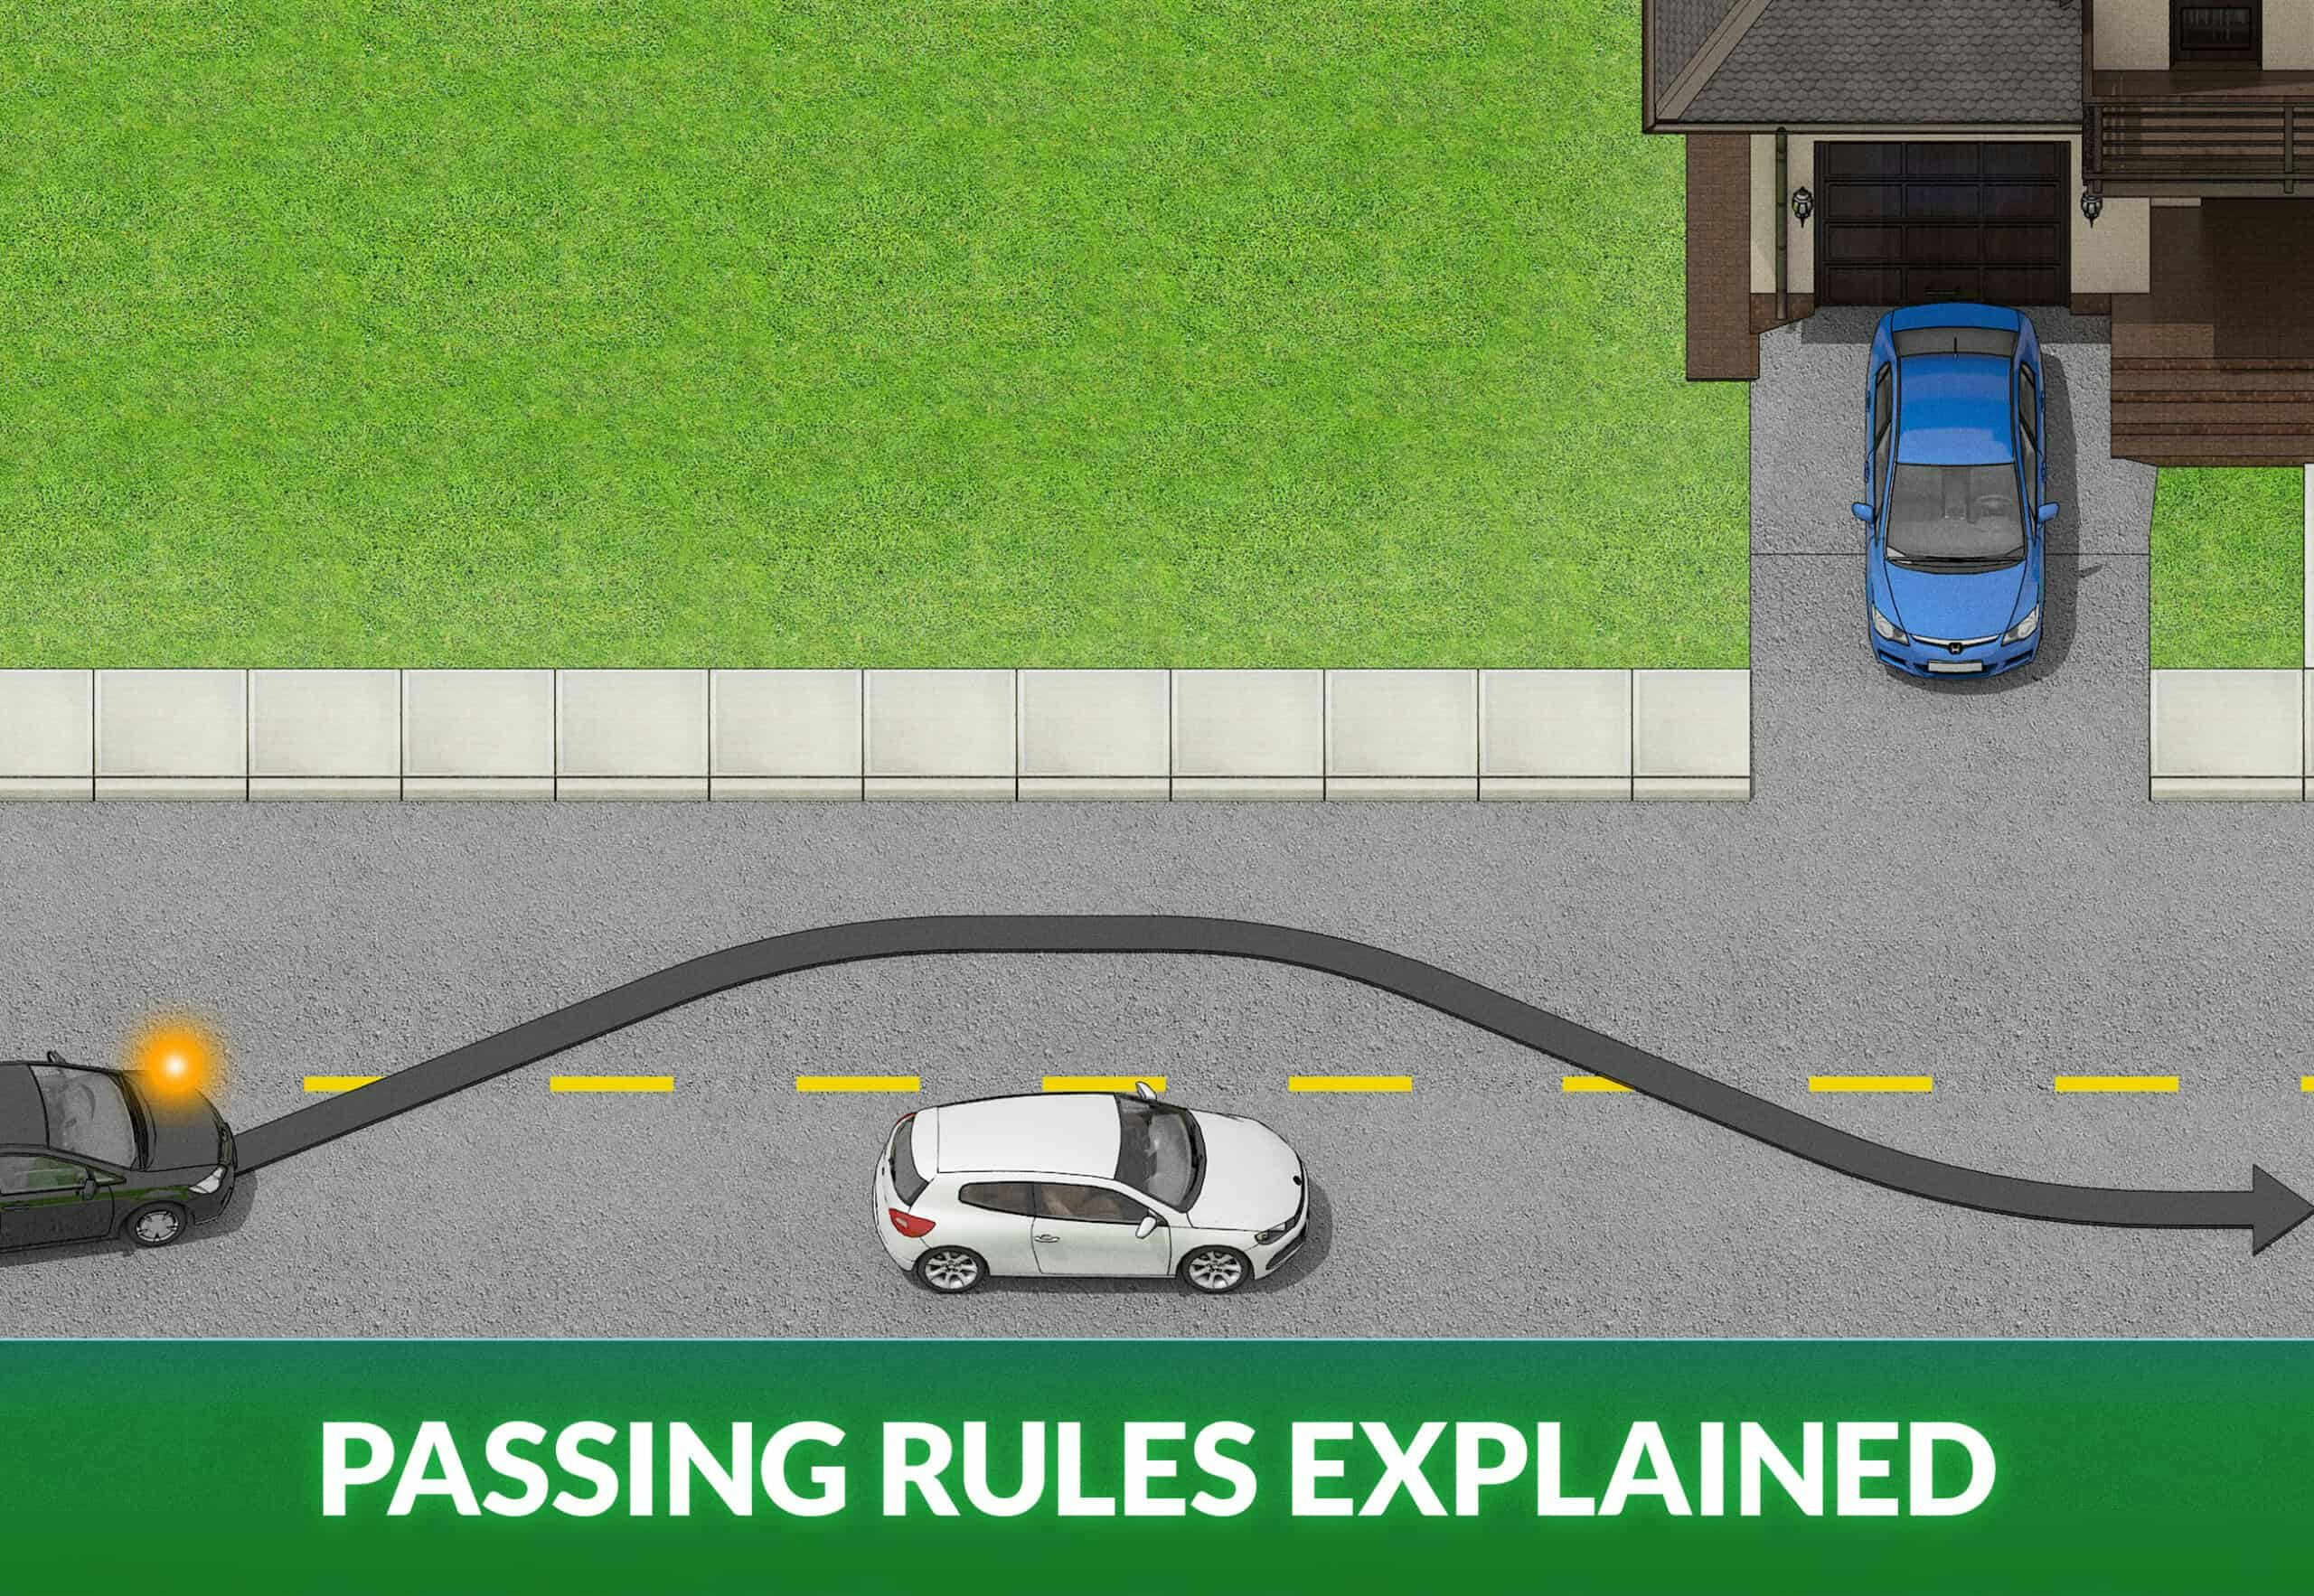 PASSING RULES EXPLAINED